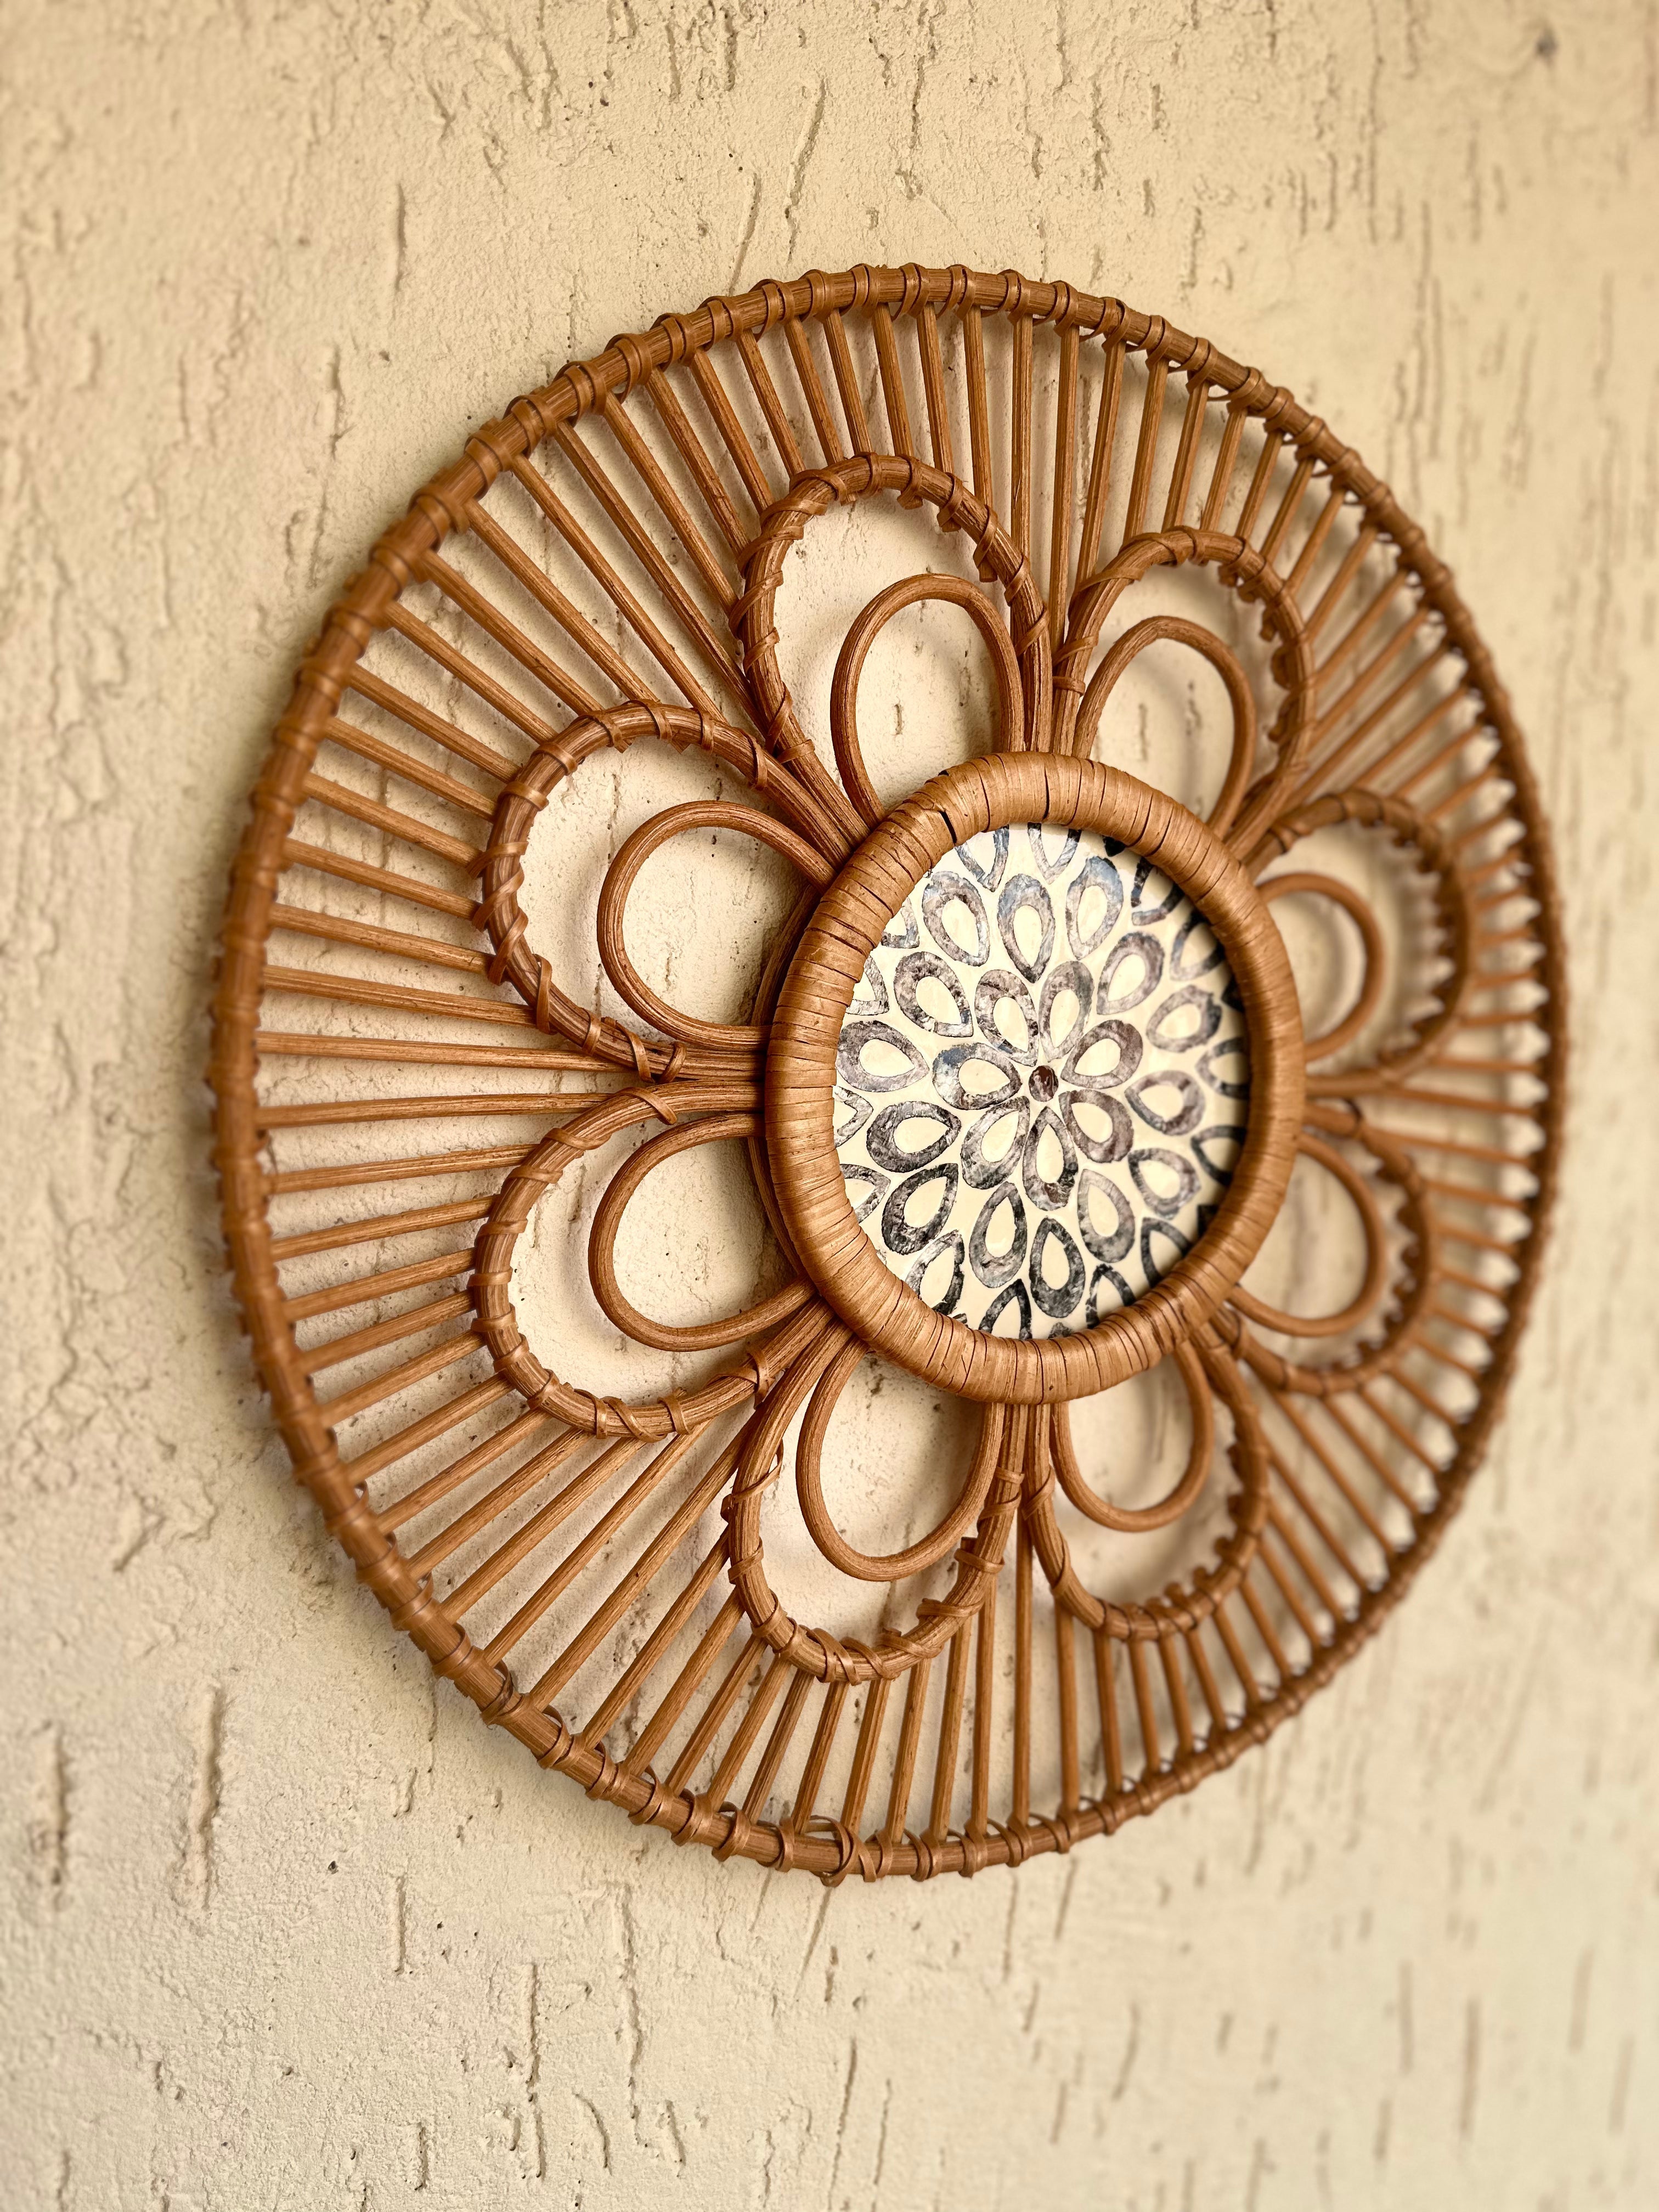 Designer Rattan Wall Decor With Mother of Pearls